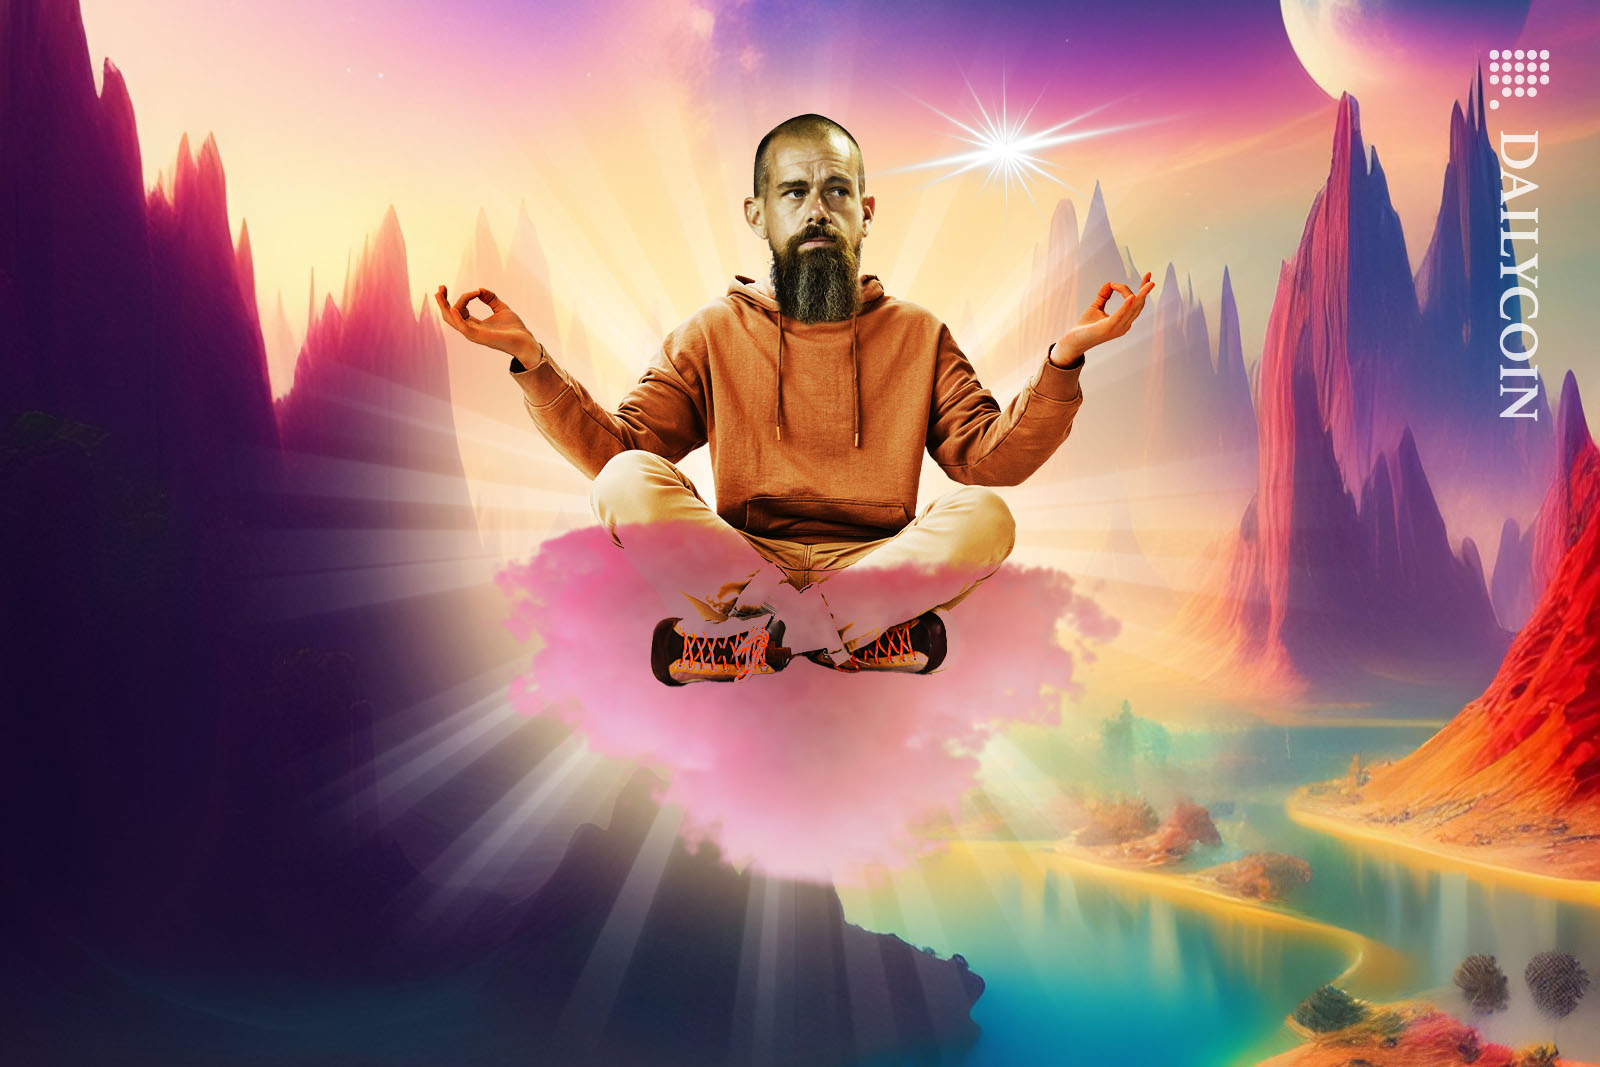 Jack Dorsey floating around a fairytale land on a pink cloud meditating, whilst keeping an eye on a spark next to him.